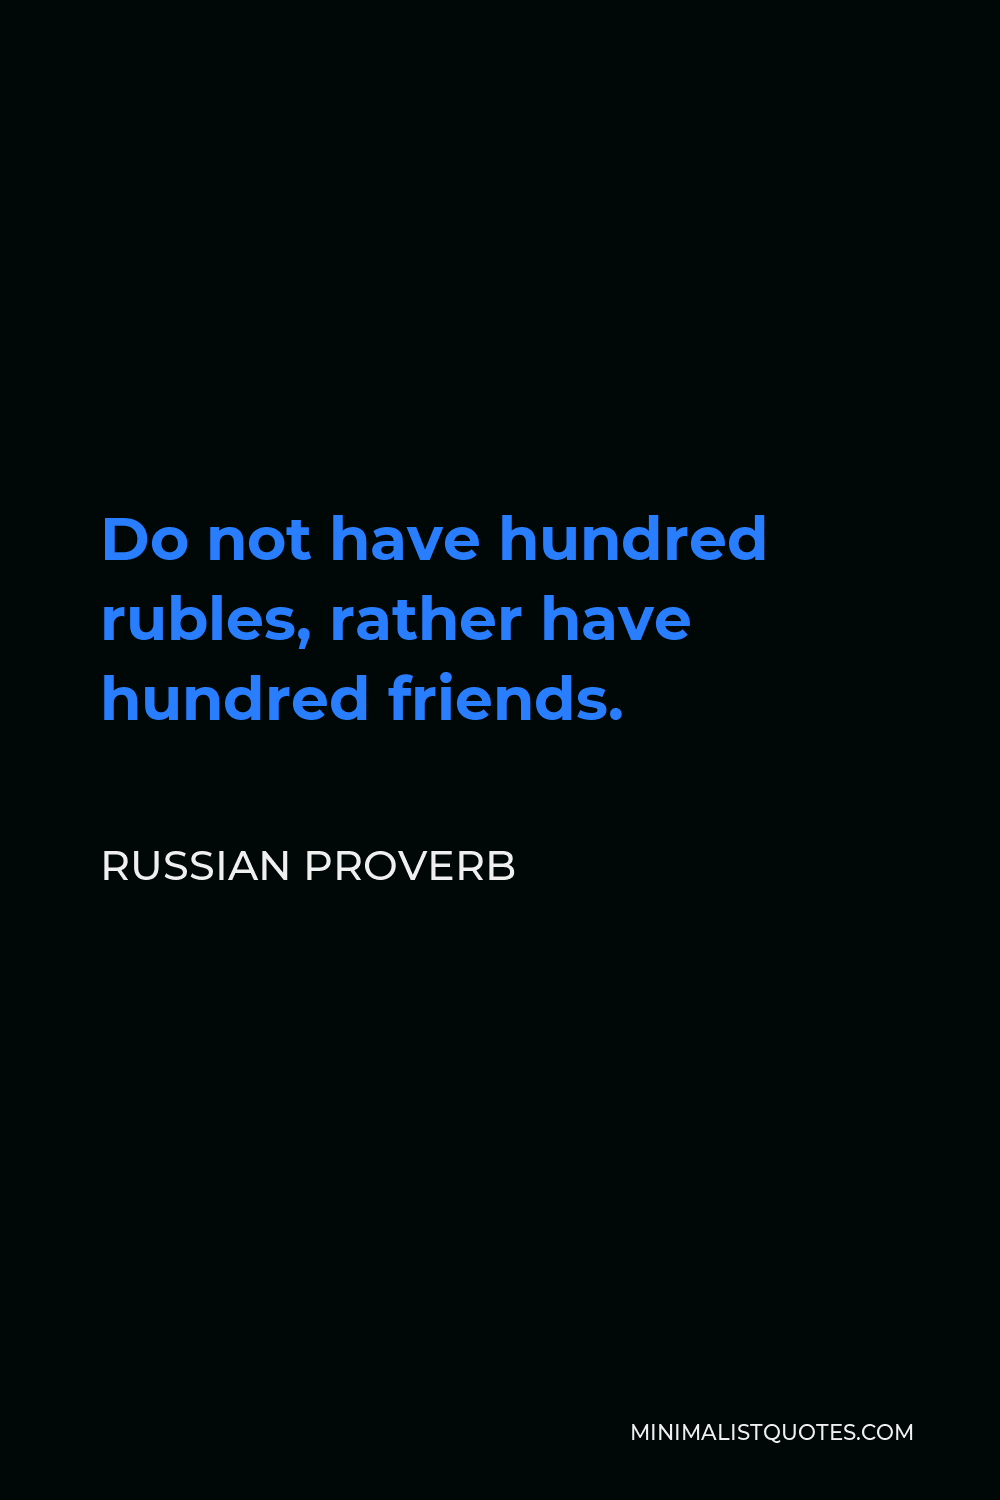 Russian Proverb Quote - Do not have hundred rubles, rather have hundred friends.